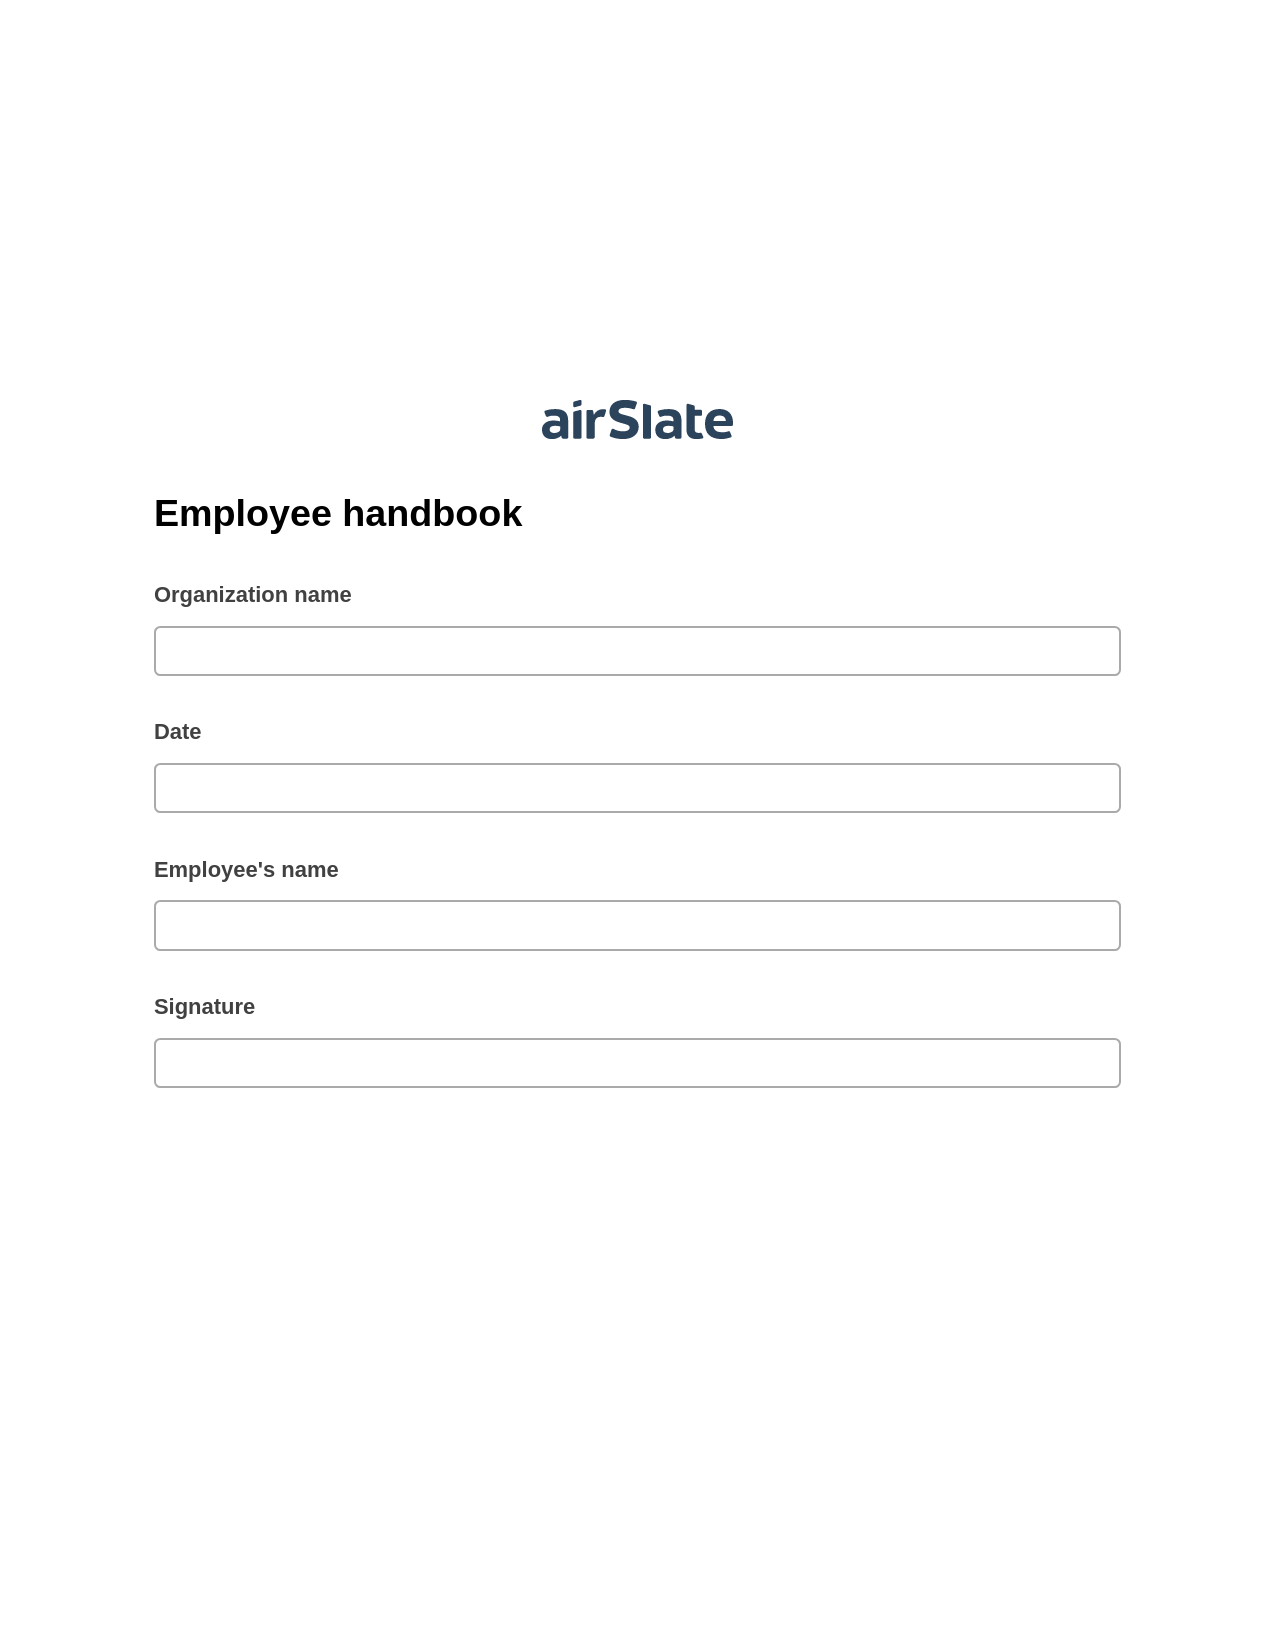 Employee handbook Pre-fill from MySQL Bot, Add Tags to Slate Bot, Export to Excel 365 Bot